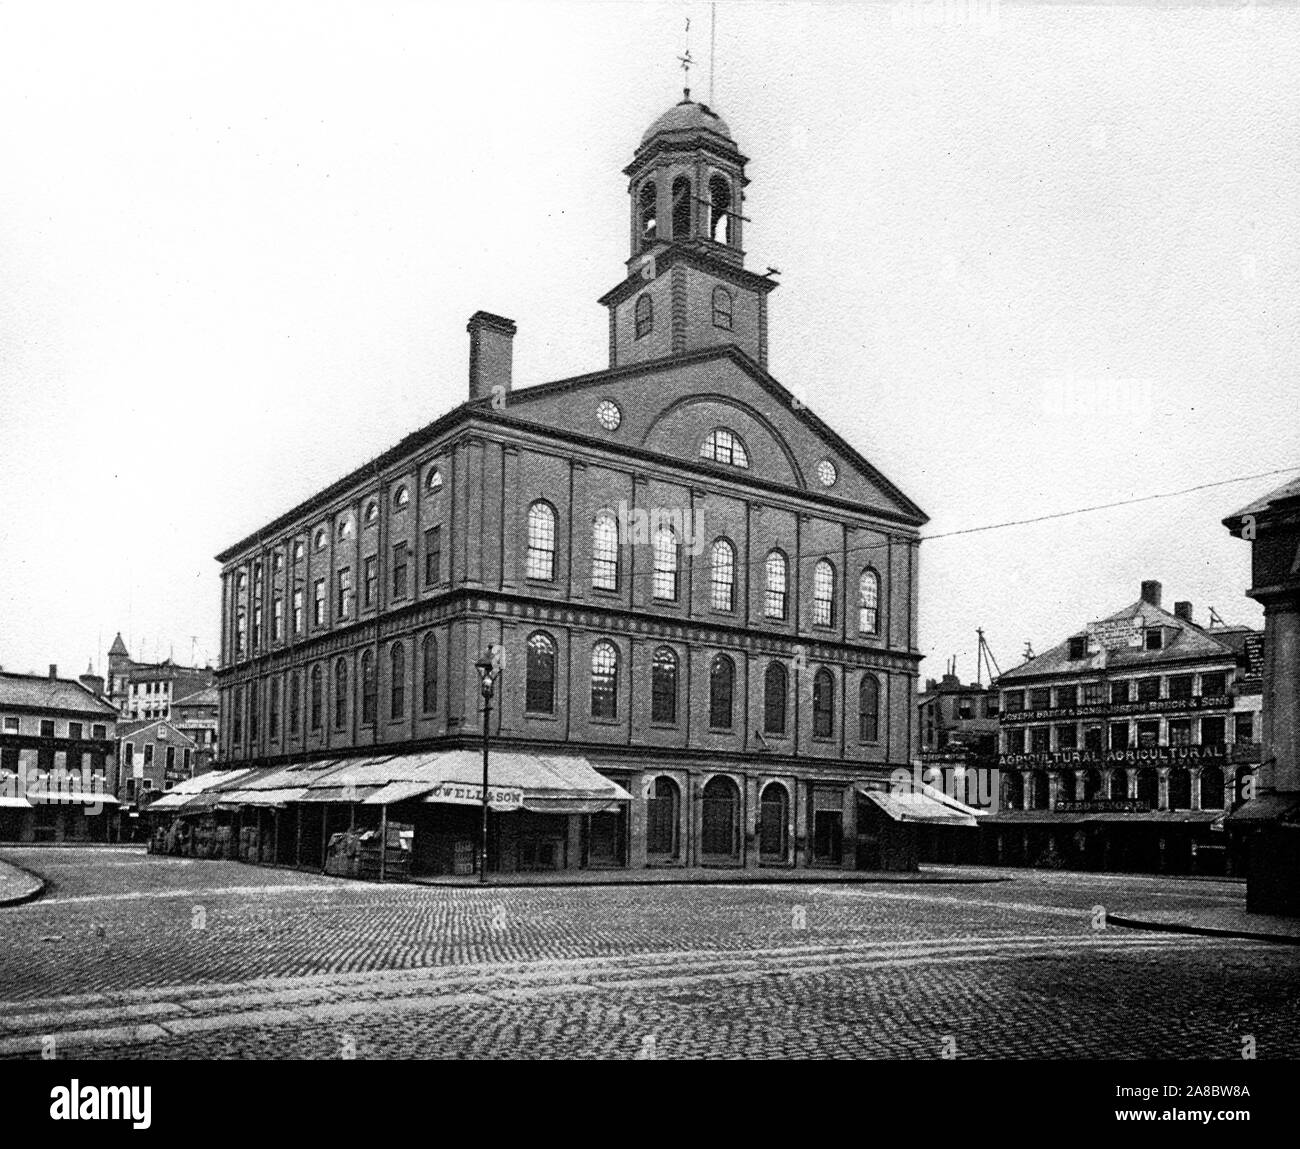 Faneuil Hall, Cradle of Liberty, Boston, Mass ca. 1936 or 1937 Stock Photo